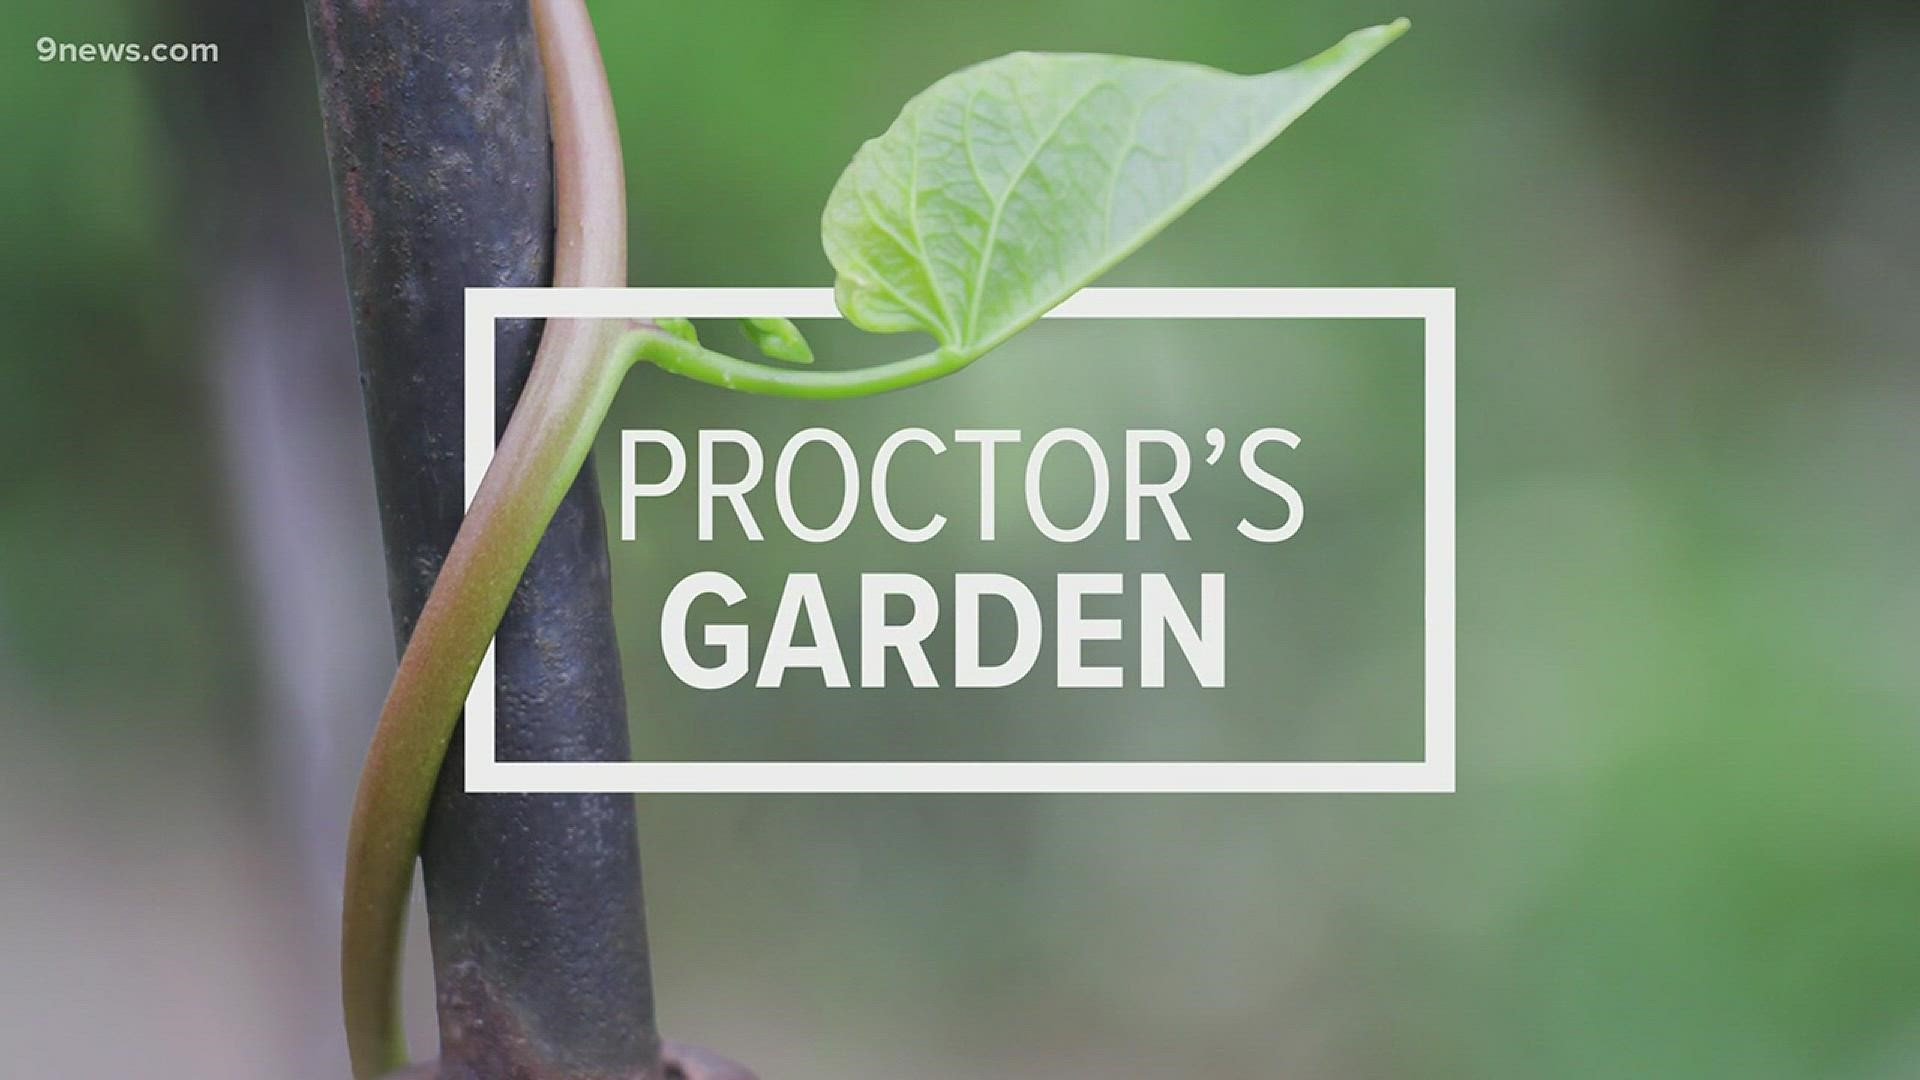 9NEWS Garden Expert Rob Proctor explores the beautiful spring flowers now blooming. Now is the time to plant cool weather veggies like radishes, spinach and cabbage.